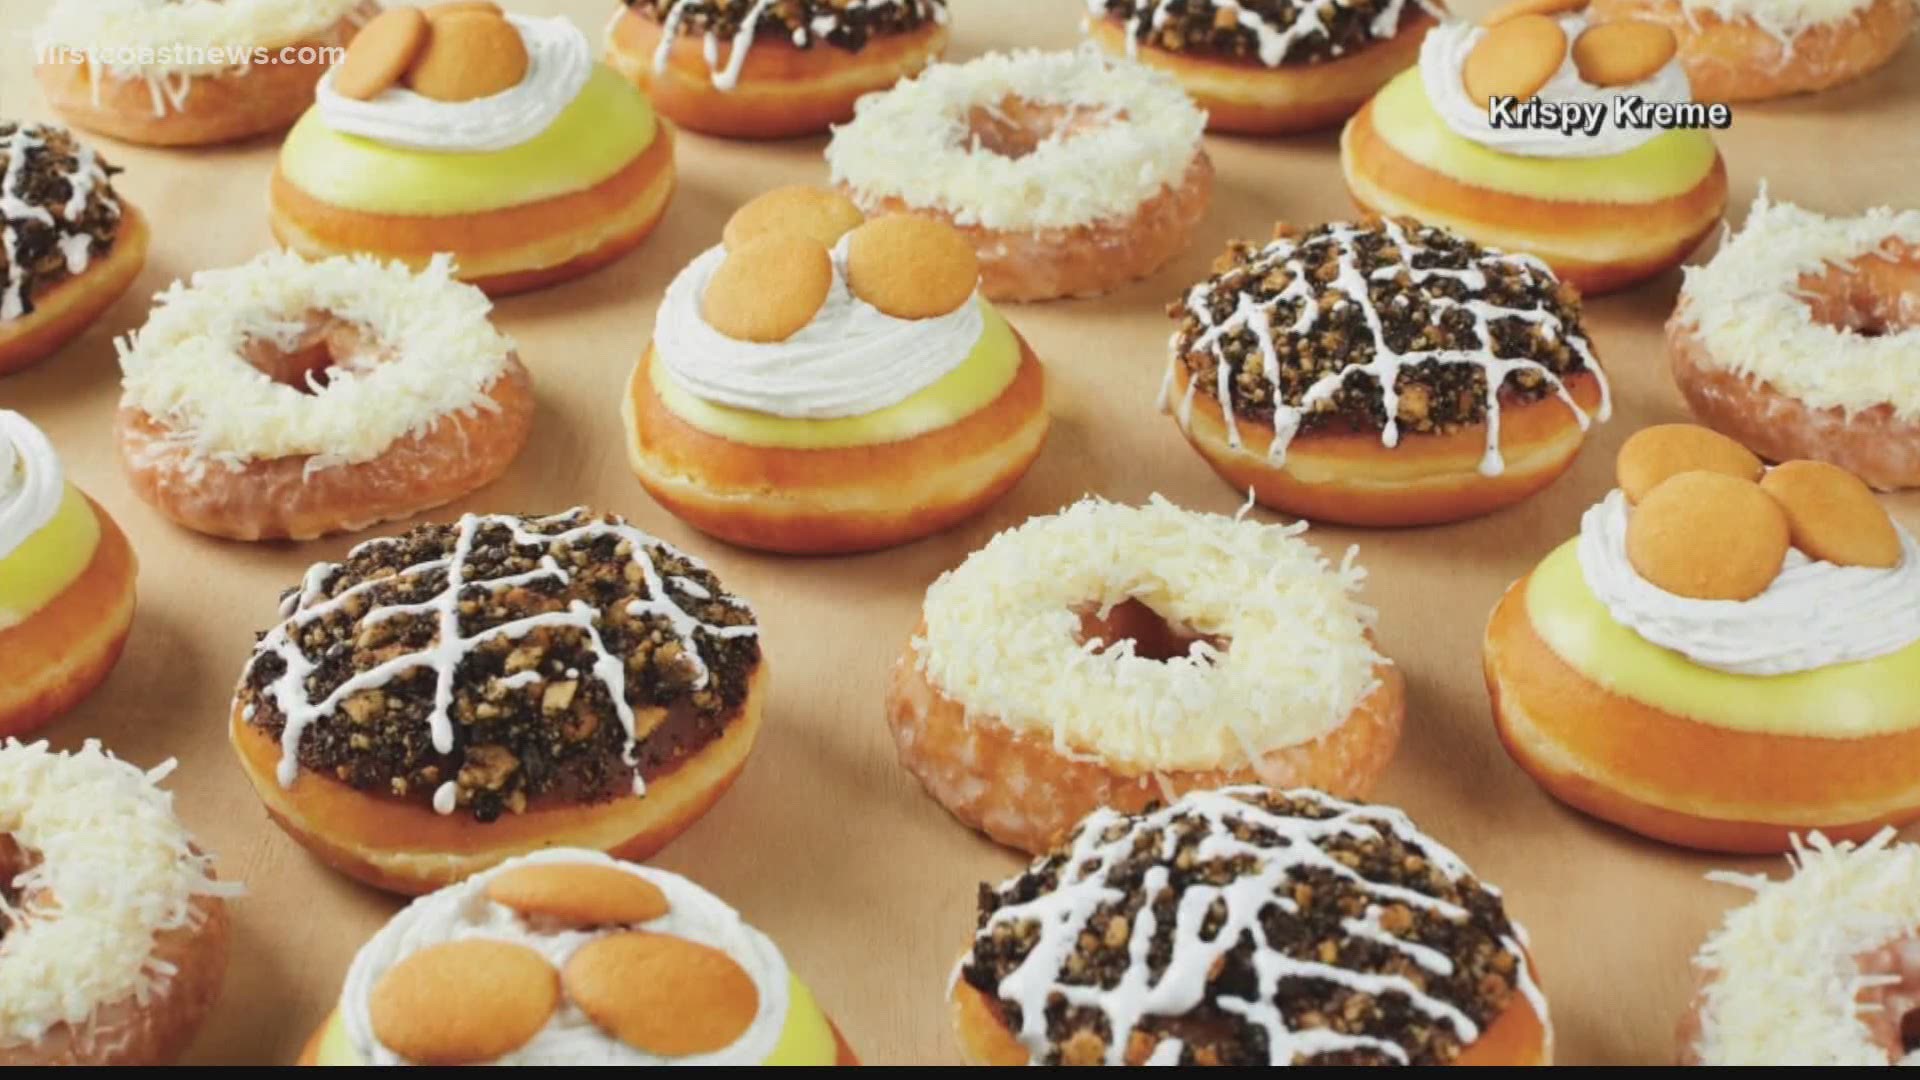 You can snag these donuts at participating Jacksonville loactions.